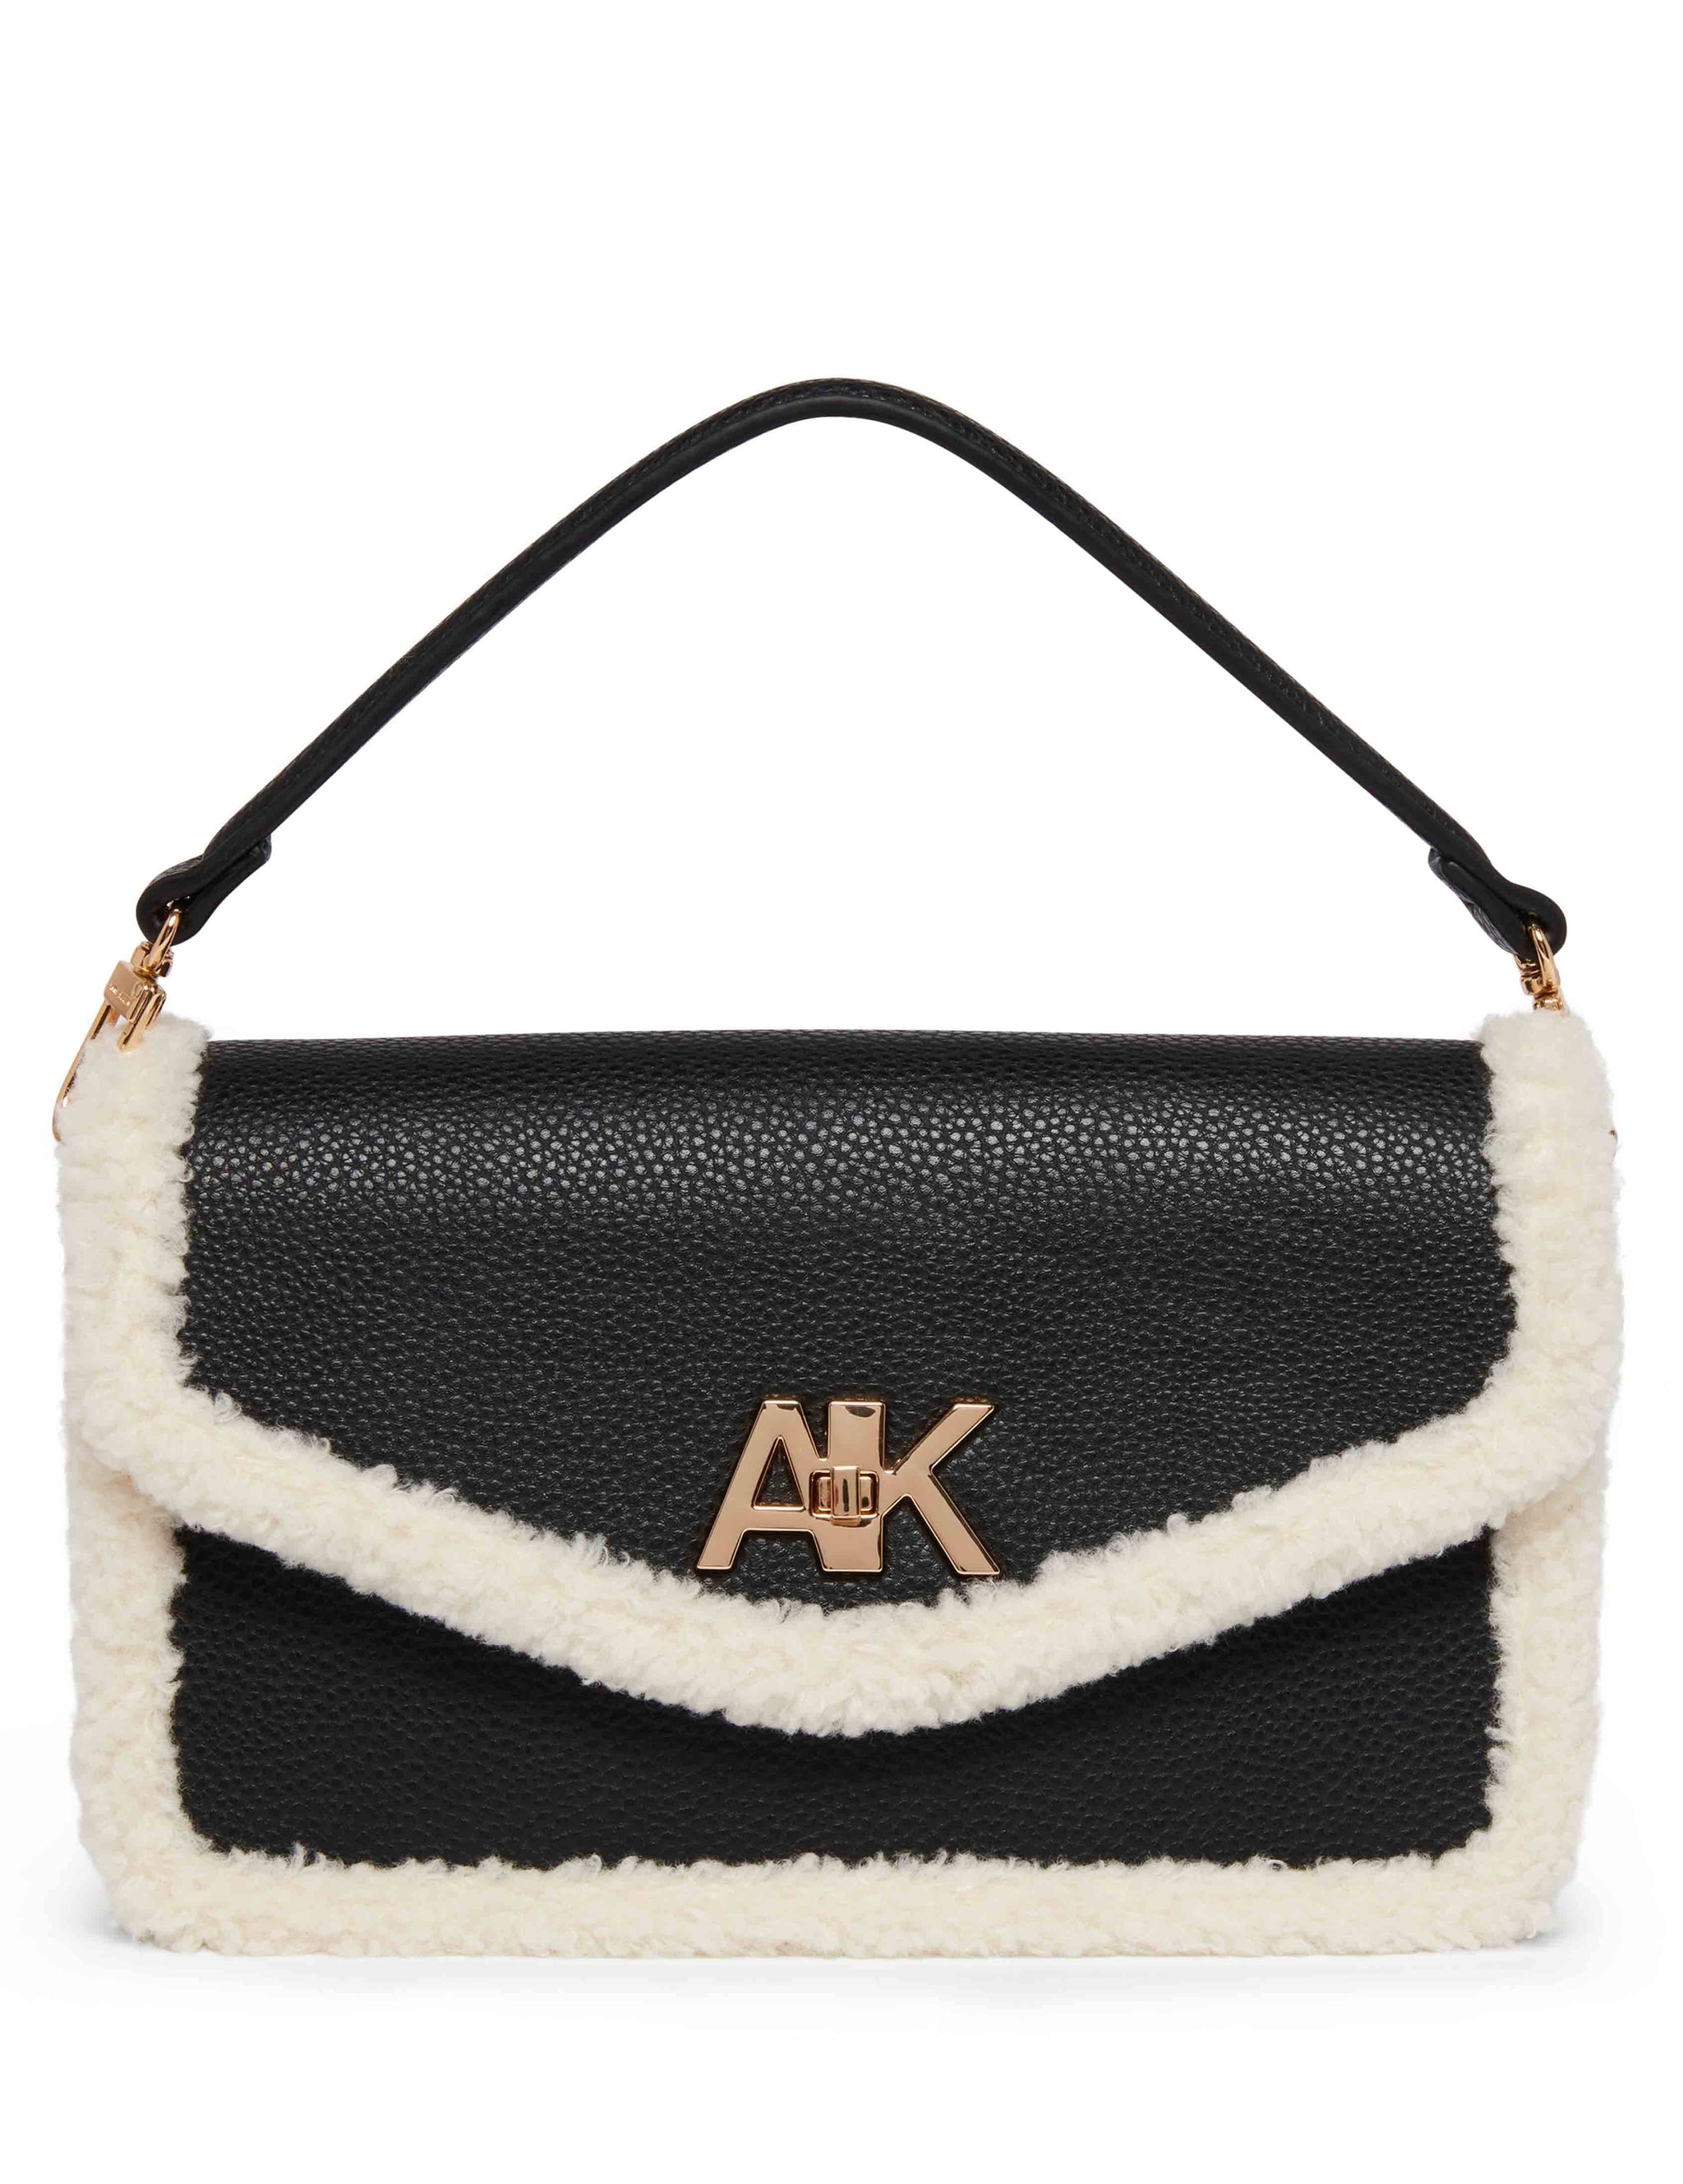 E/W Convertible Sherpa Flap Shoulder Bag With Turn Lock